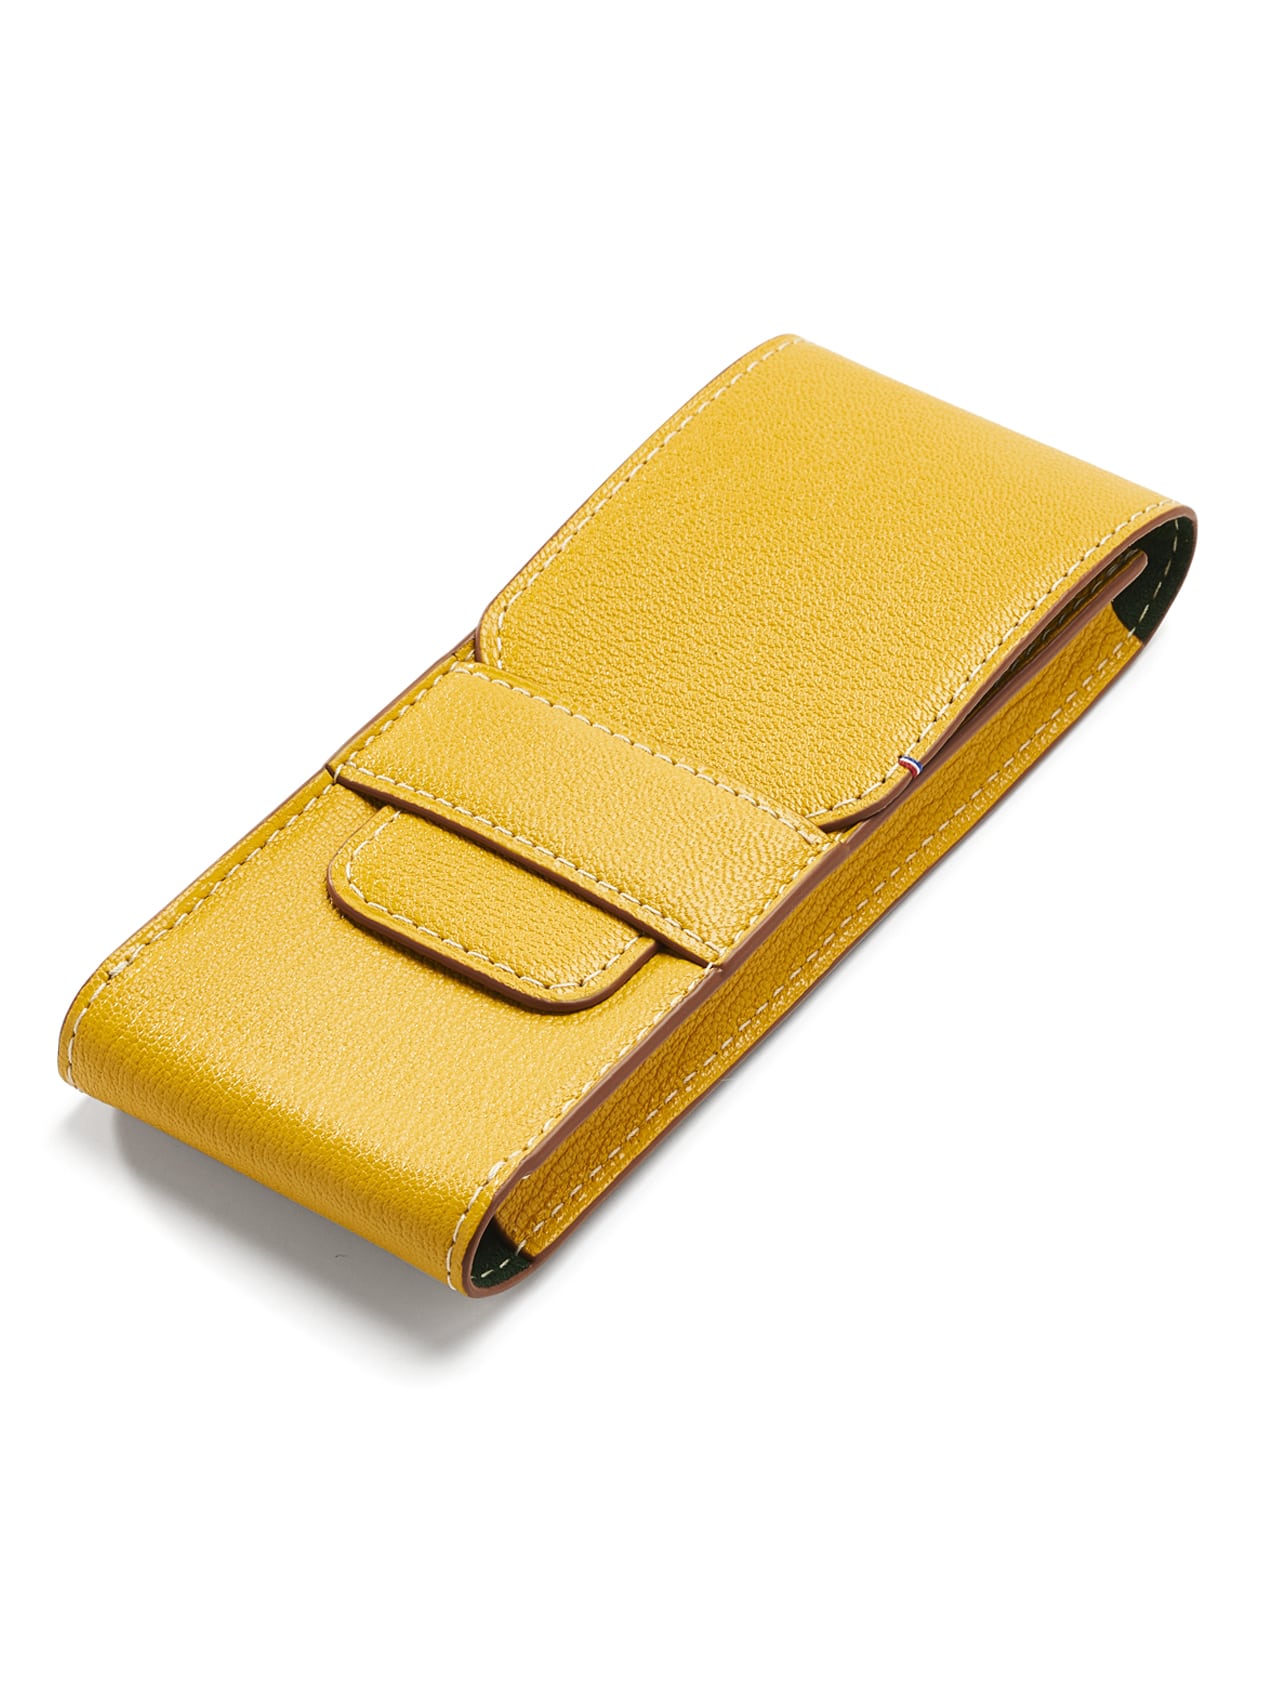 jean rousseau leather goods watch case yellow green